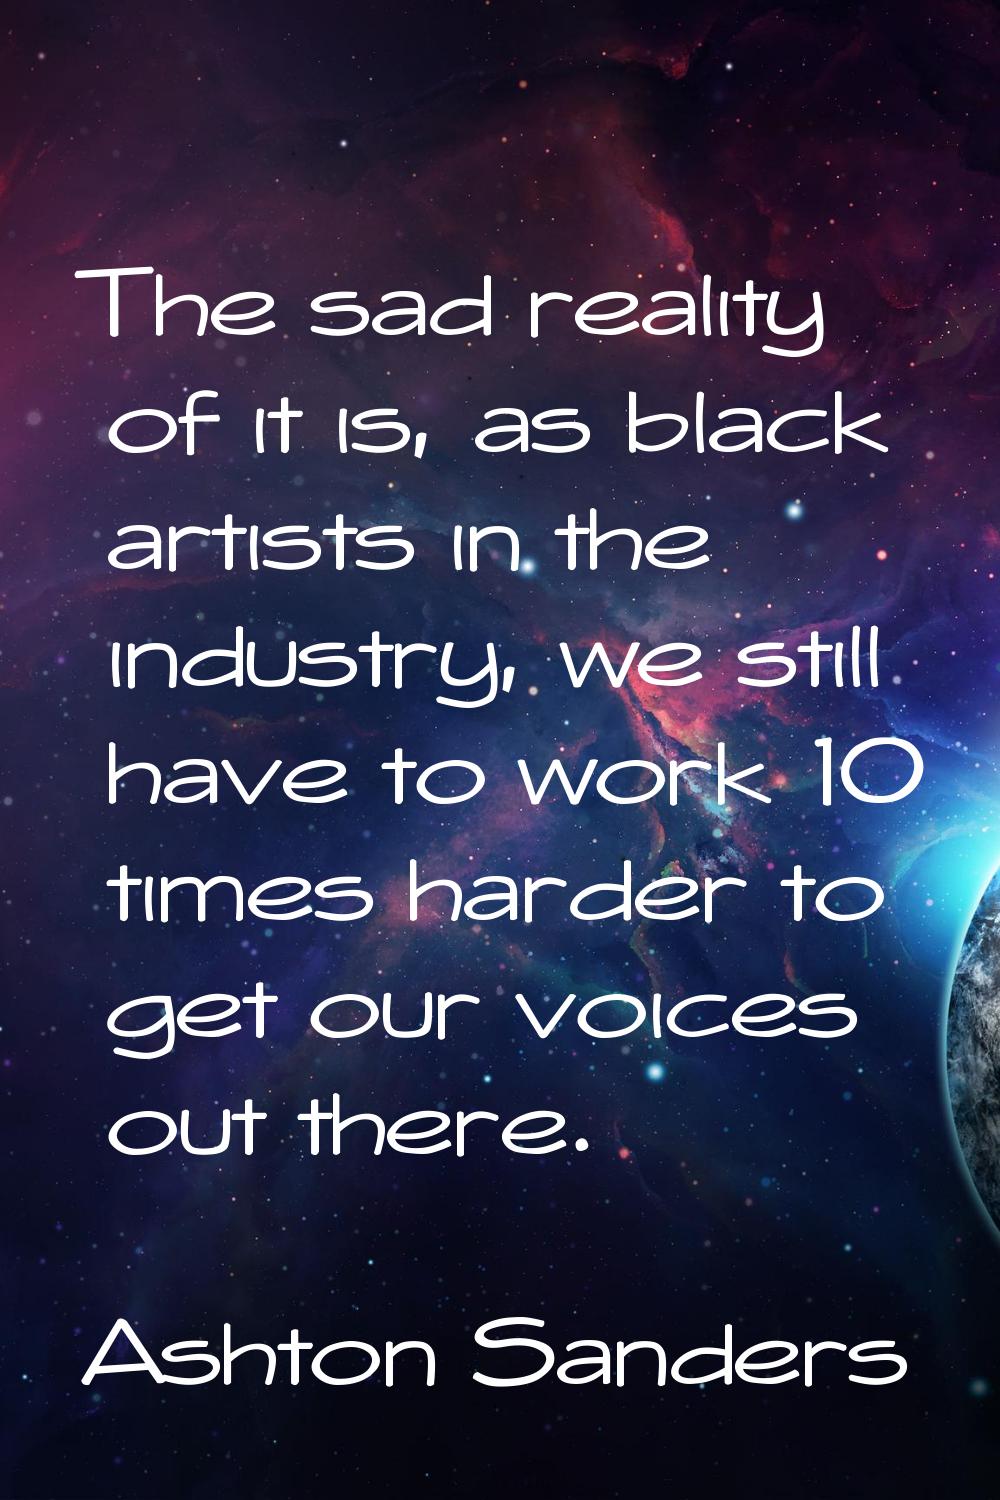 The sad reality of it is, as black artists in the industry, we still have to work 10 times harder t